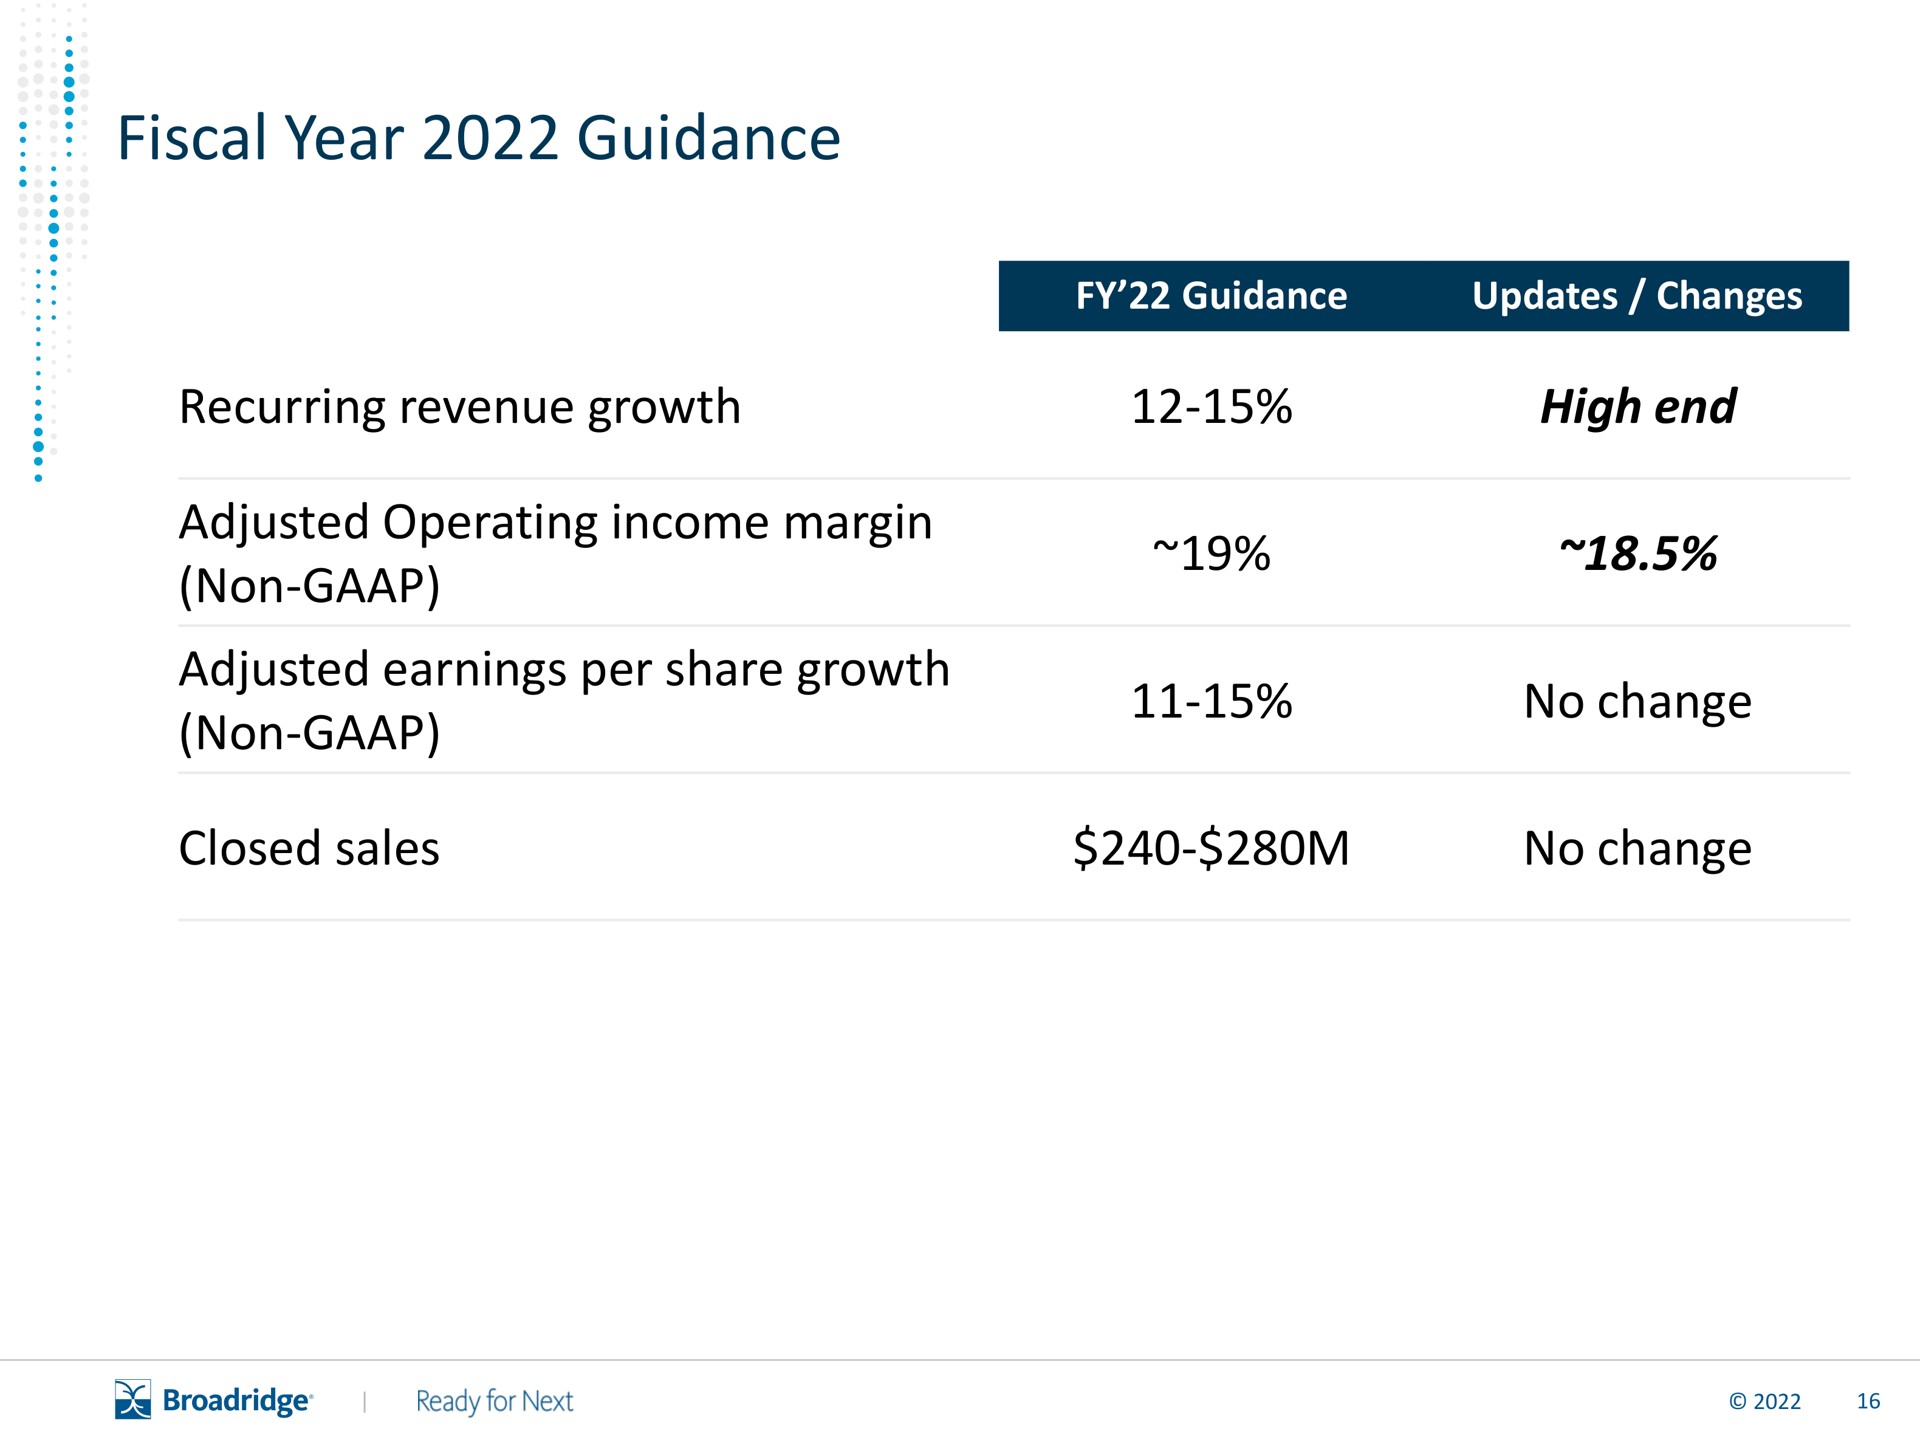 fiscal year guidance recurring revenue growth high end adjusted operating income margin non adjusted earnings per share growth non no change closed sales no change | Broadridge Financial Solutions